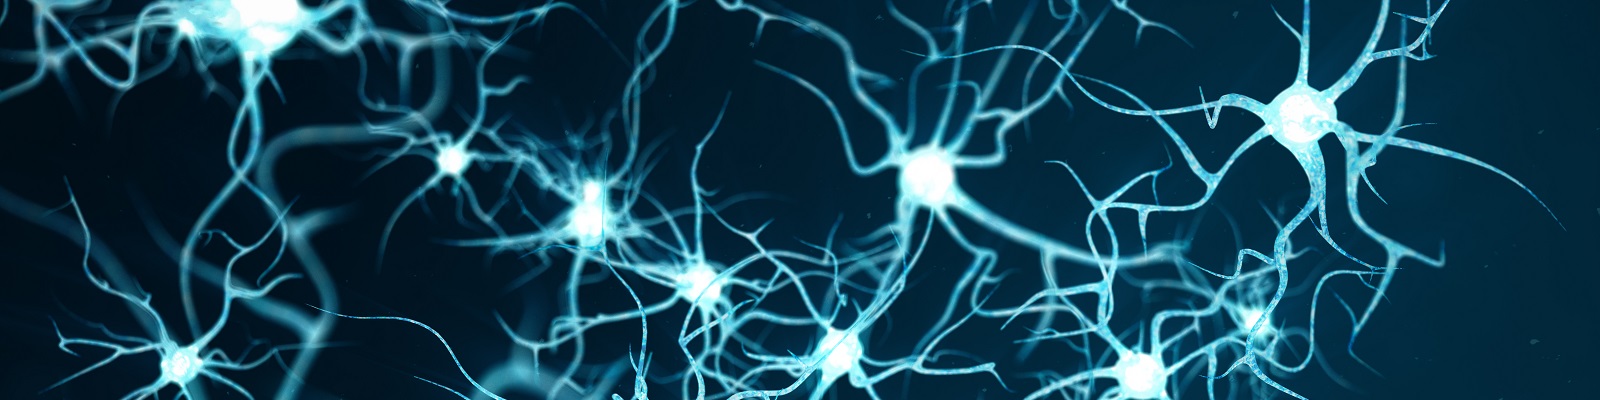 Neurons firing and moving around with a dark blue background